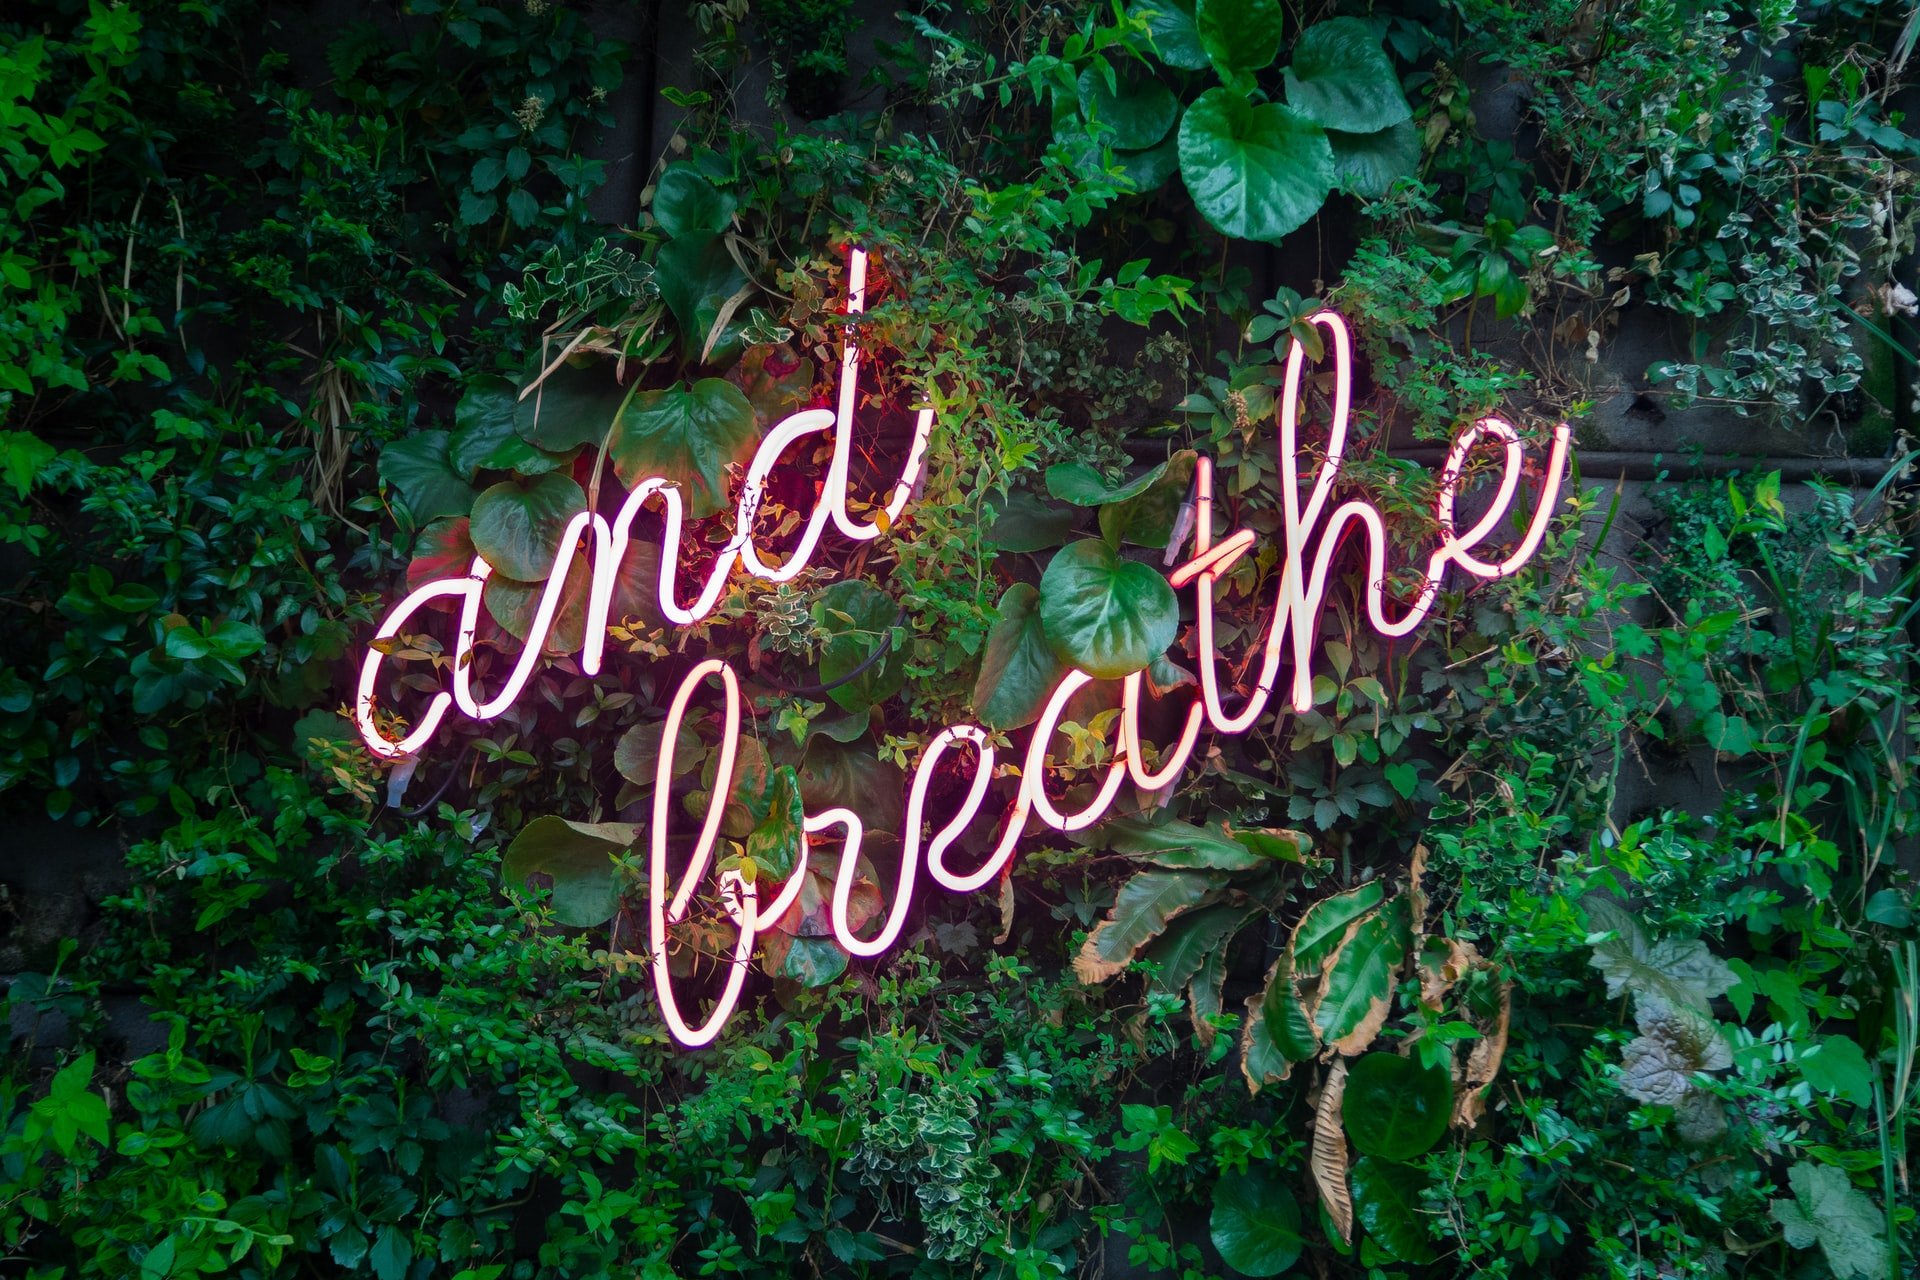 Red neon lettering spelling "and breathe" on a background of greenery